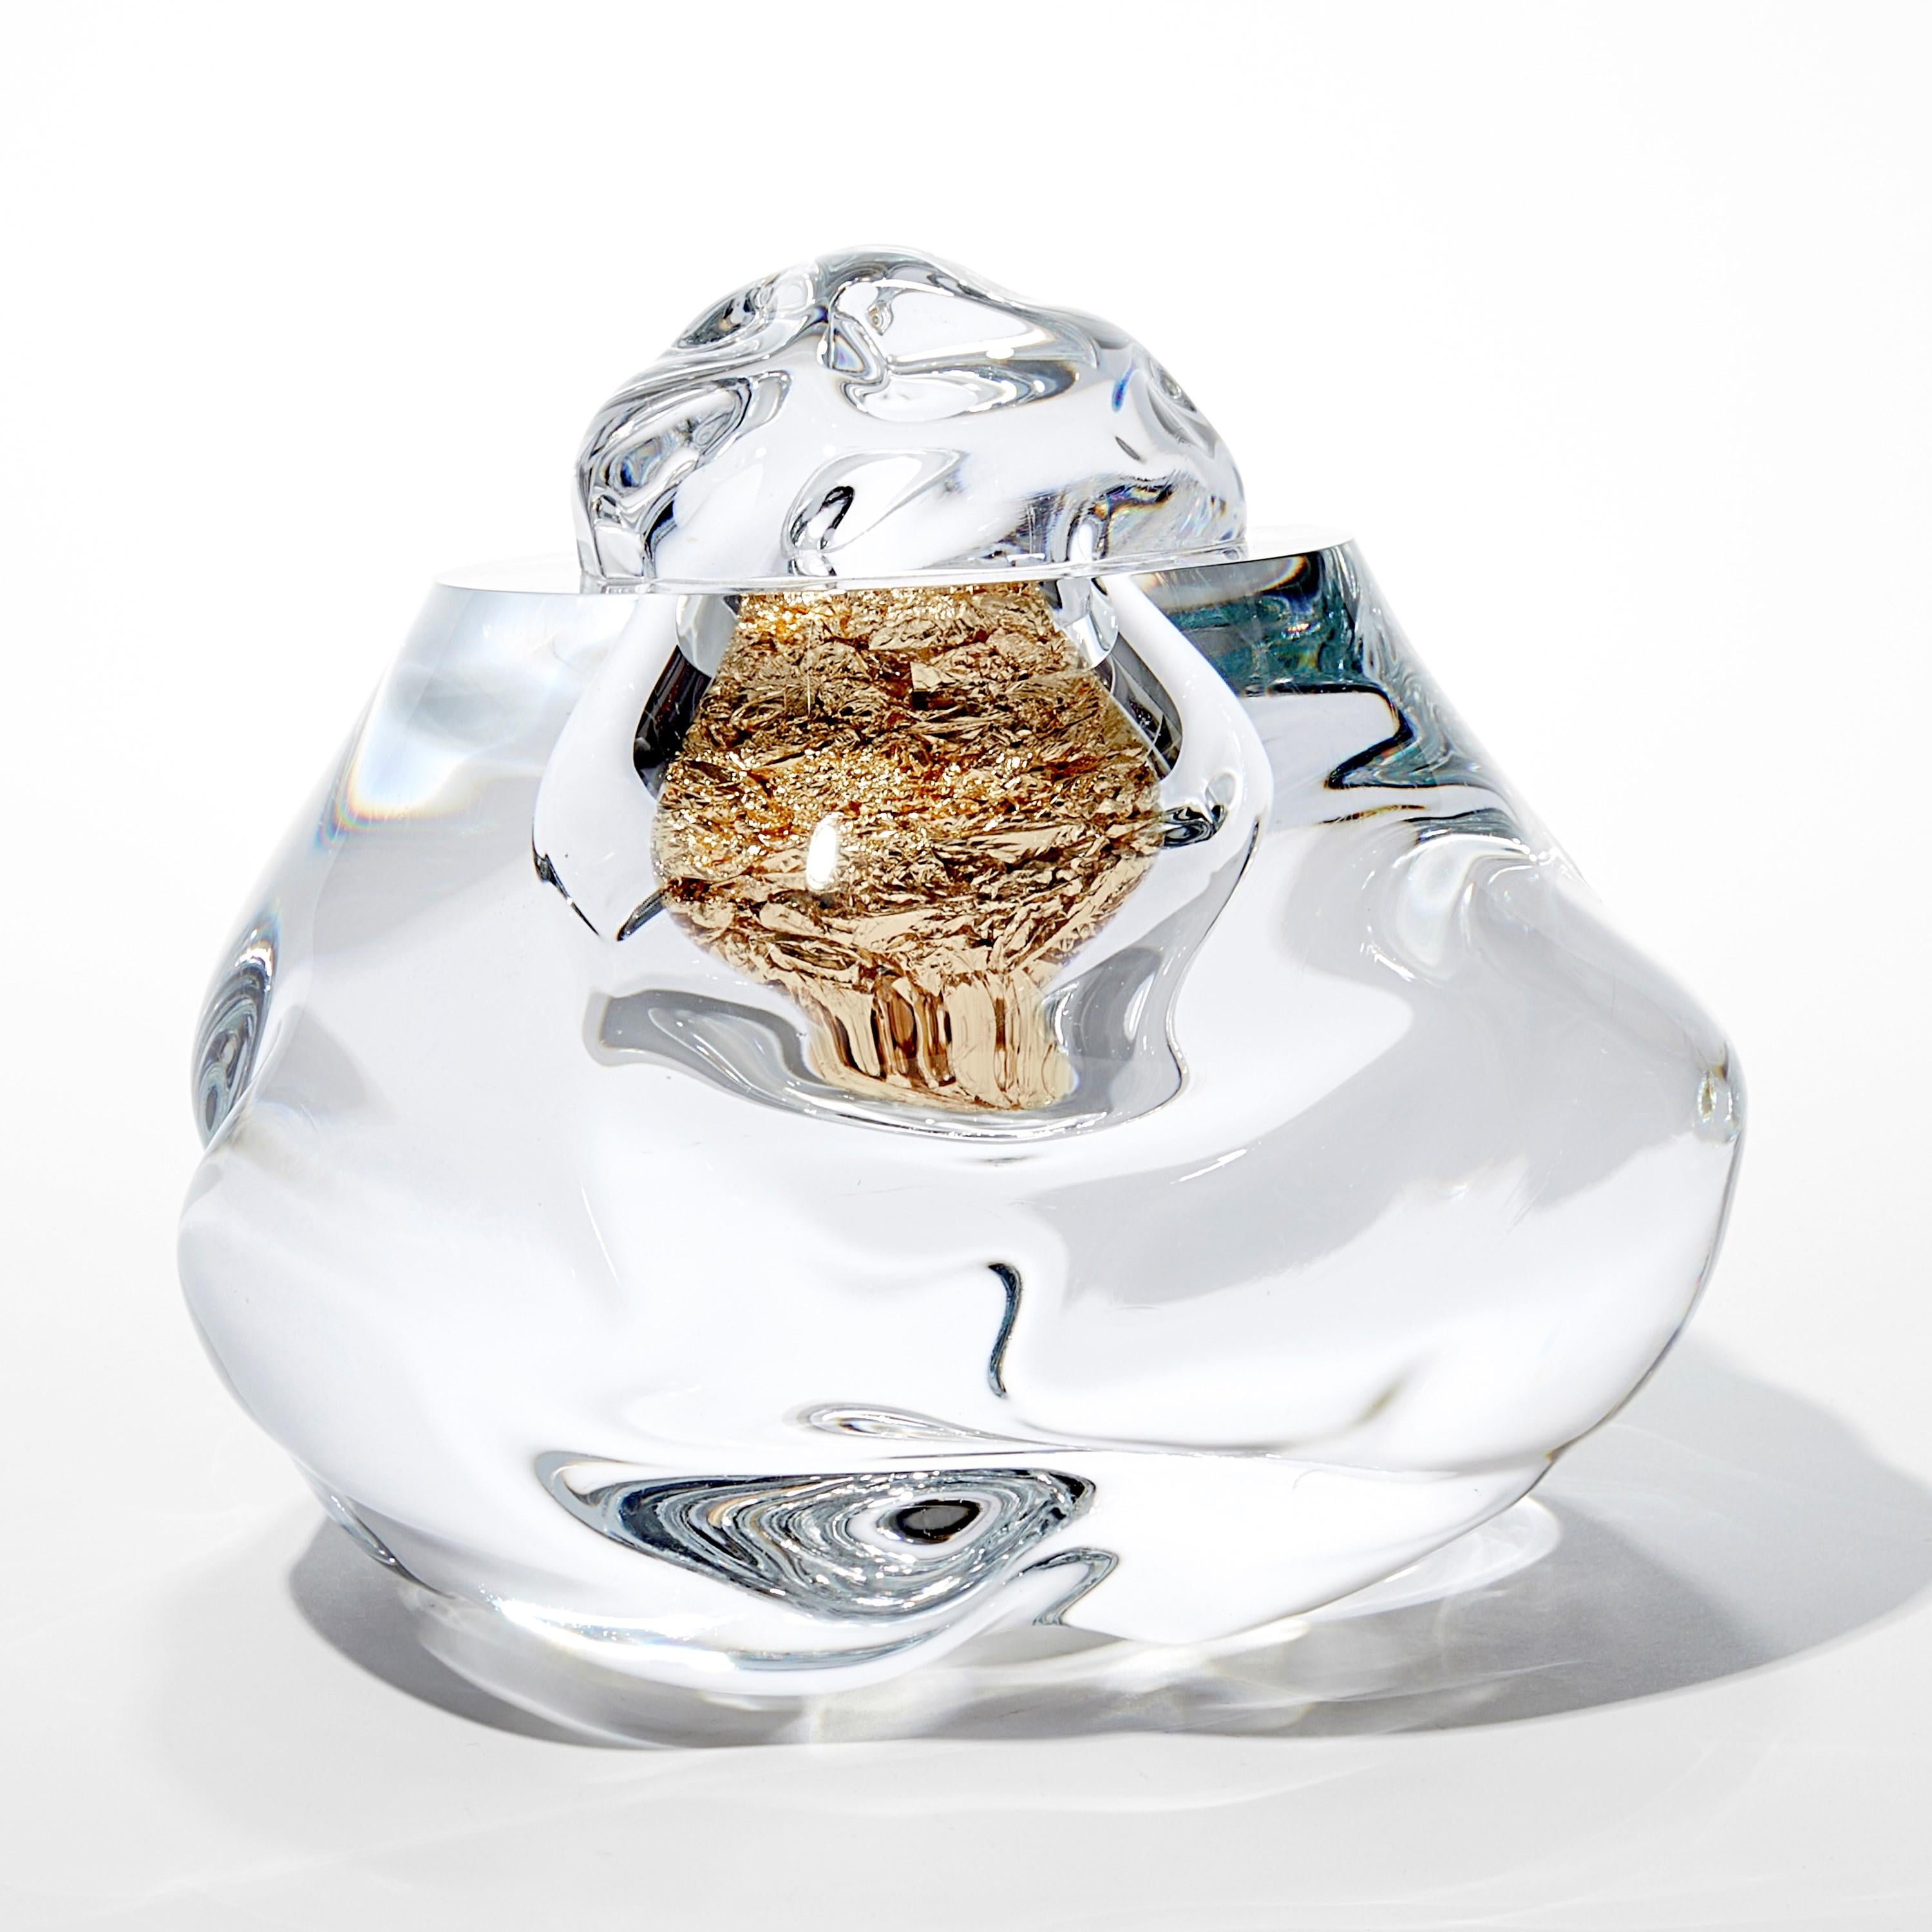 British Erratic L with 23ct Red Gold, amorphic optical glass sculpture by Anthony Scala